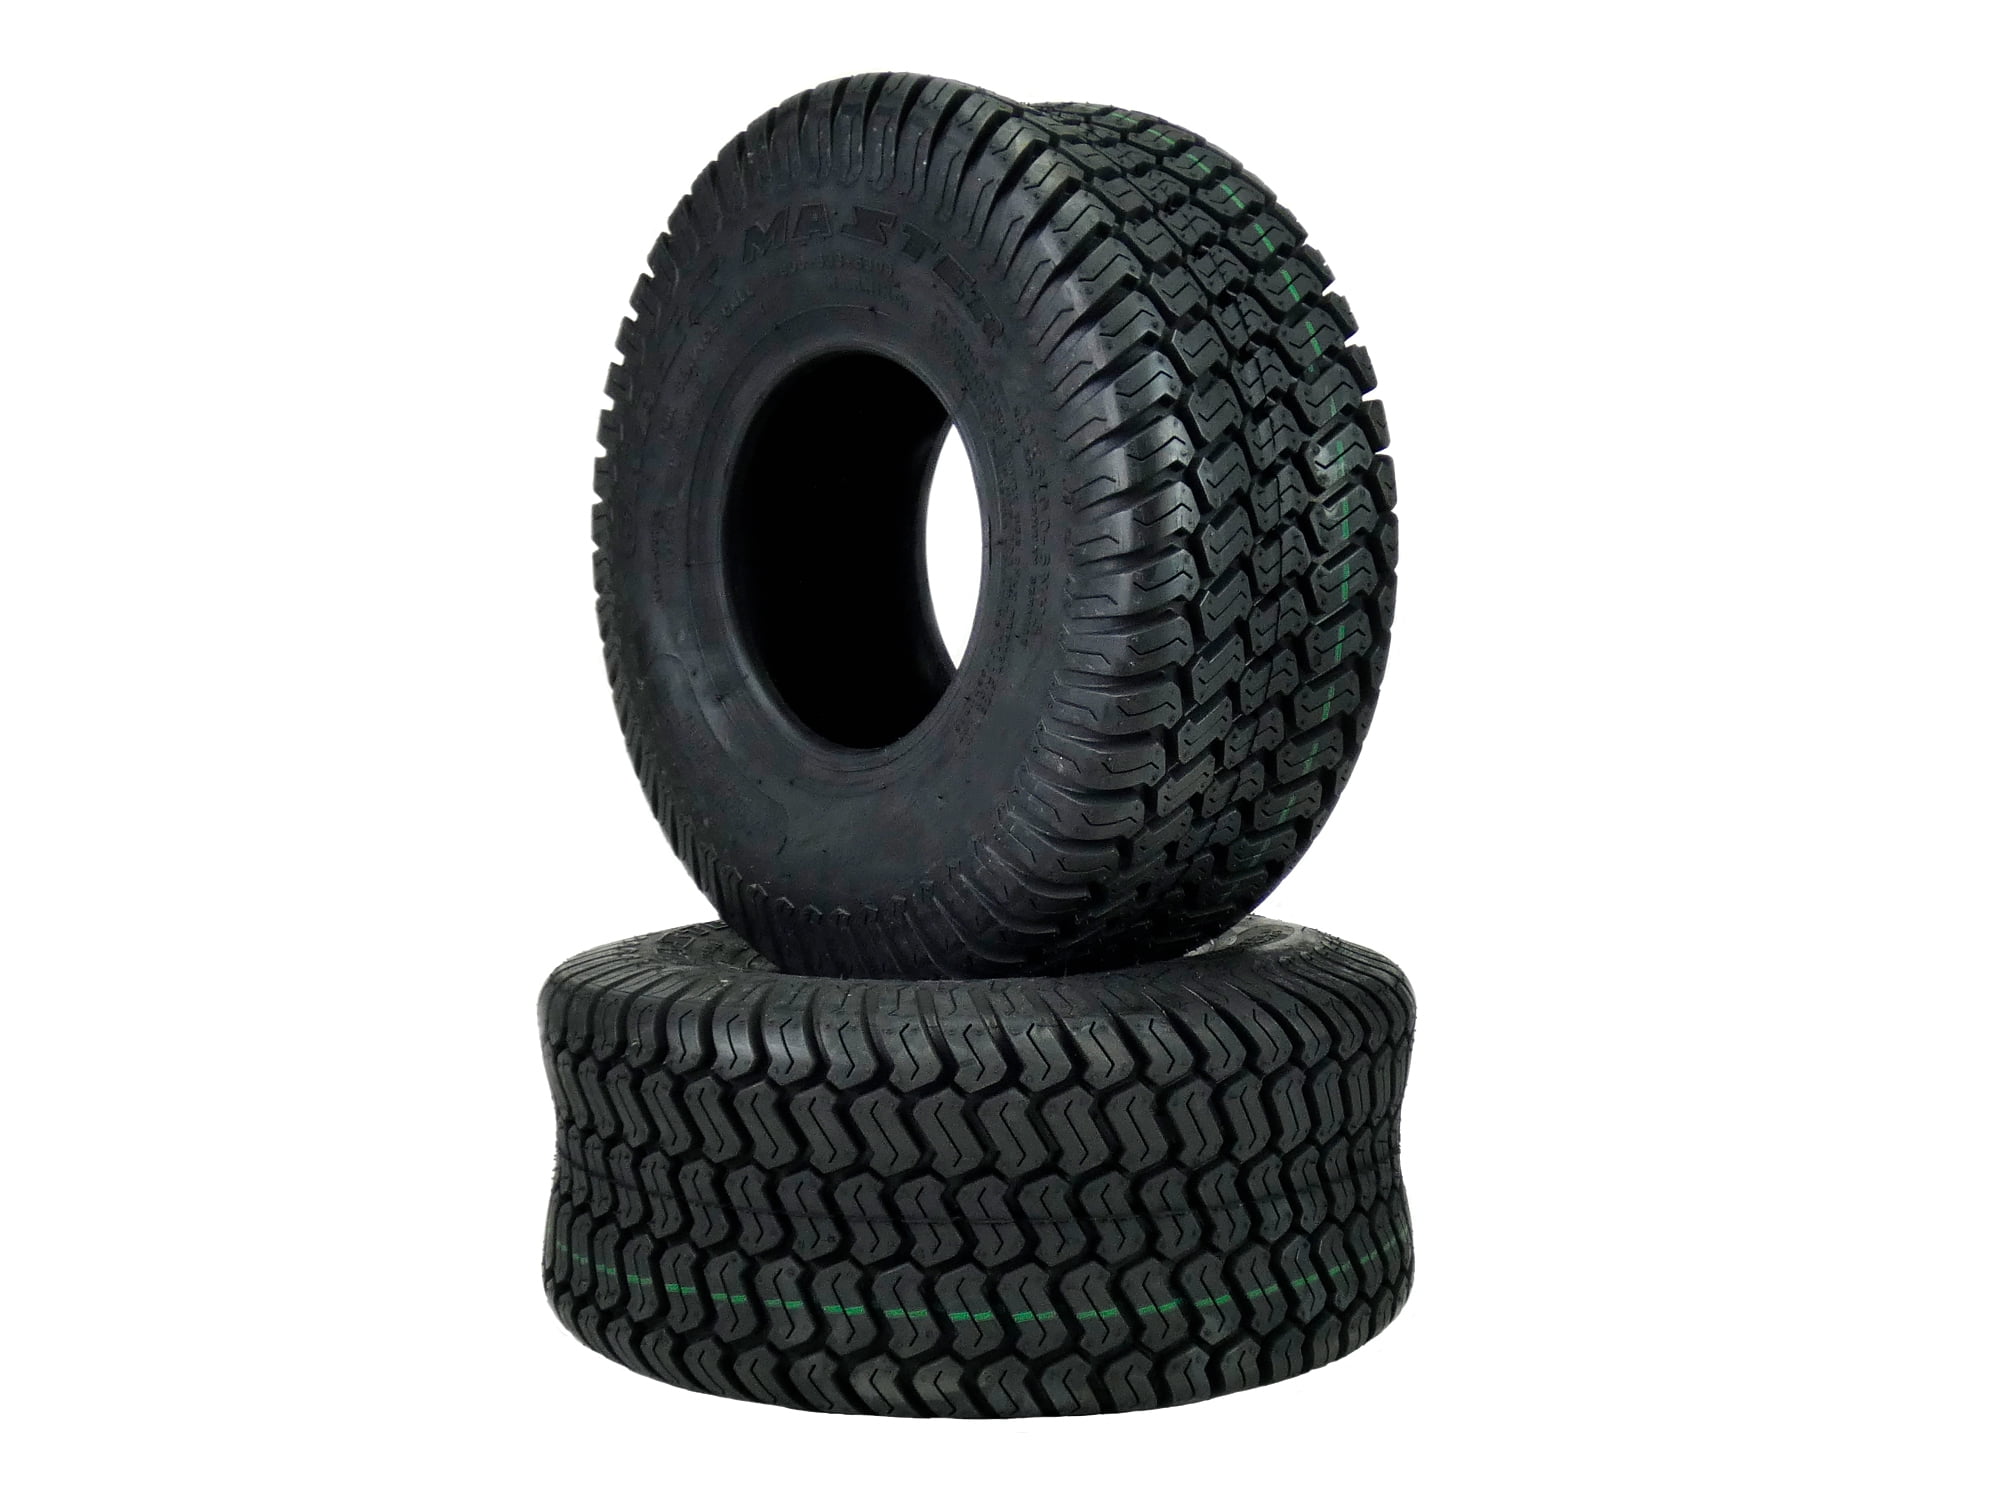 TWO 15X6.00-6 Wanda Turf Lawn 15X6-6 4 Ply Rated Lawn Mower Set of Two Tires 